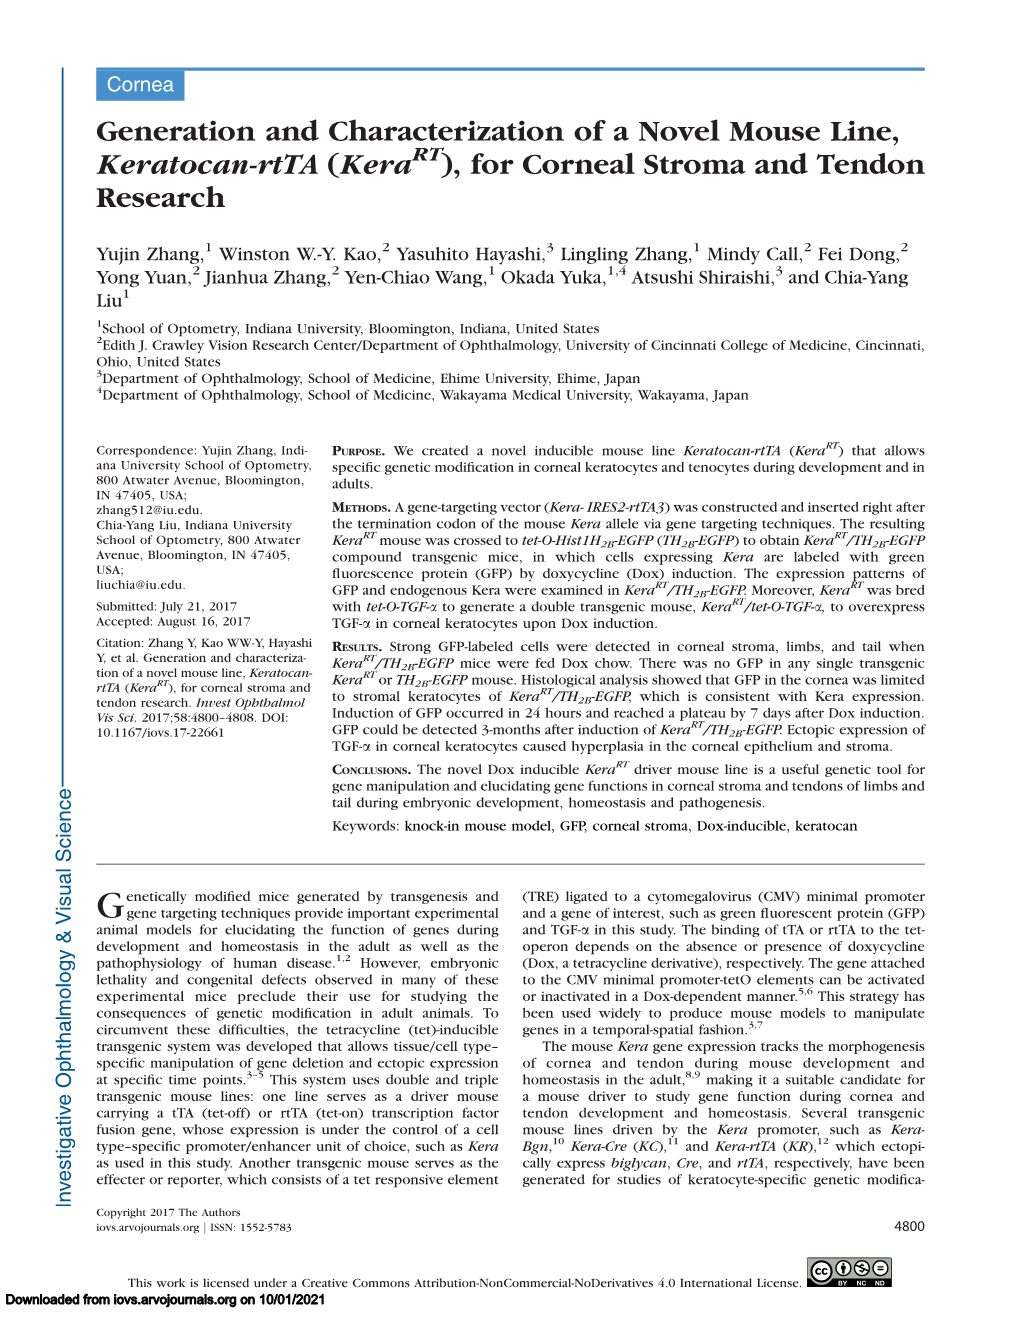 Generation and Characterization of a Novel Mouse Line, Keratocan-Rtta (Kerart), for Corneal Stroma and Tendon Research